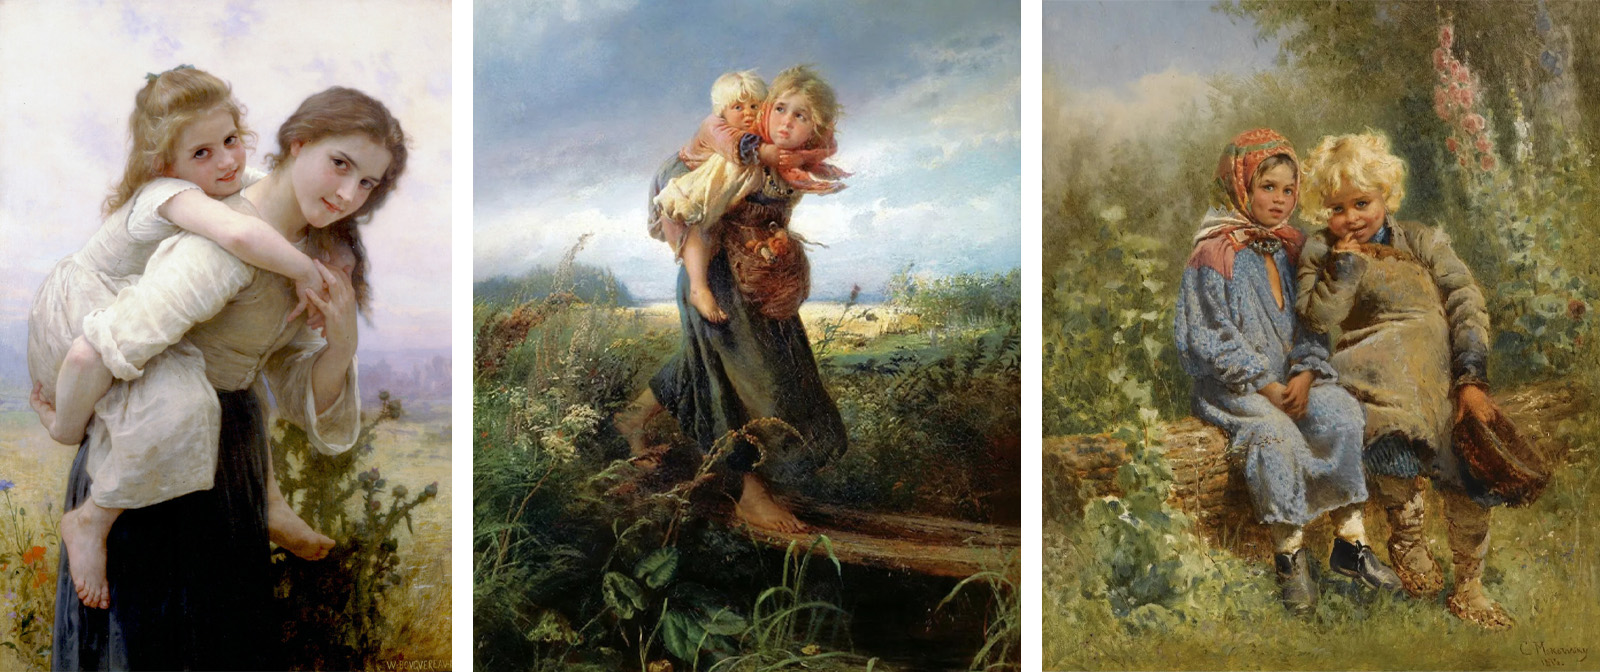 The accident that led Makovsky to create the painting “Children Running from a Thunderstorm”.